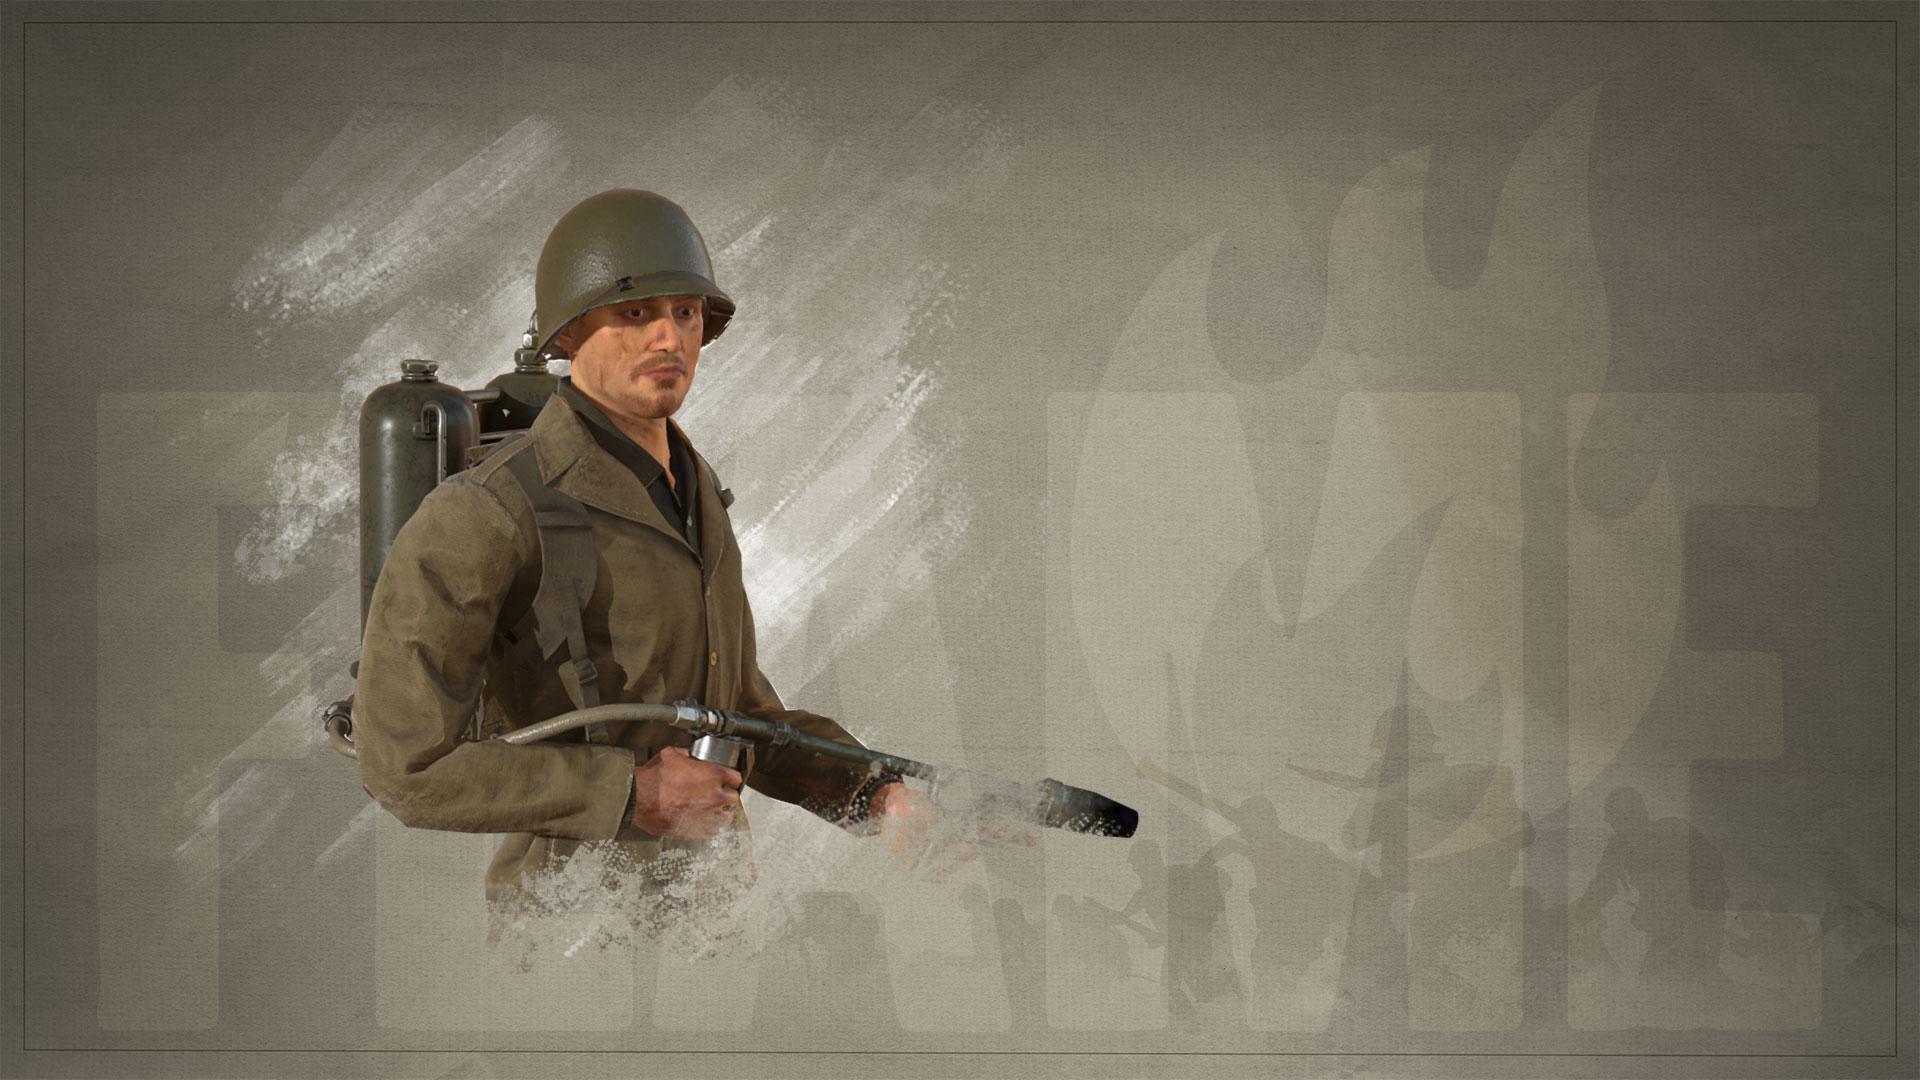 Flamethrower. Wallpaper from Day of Infamy